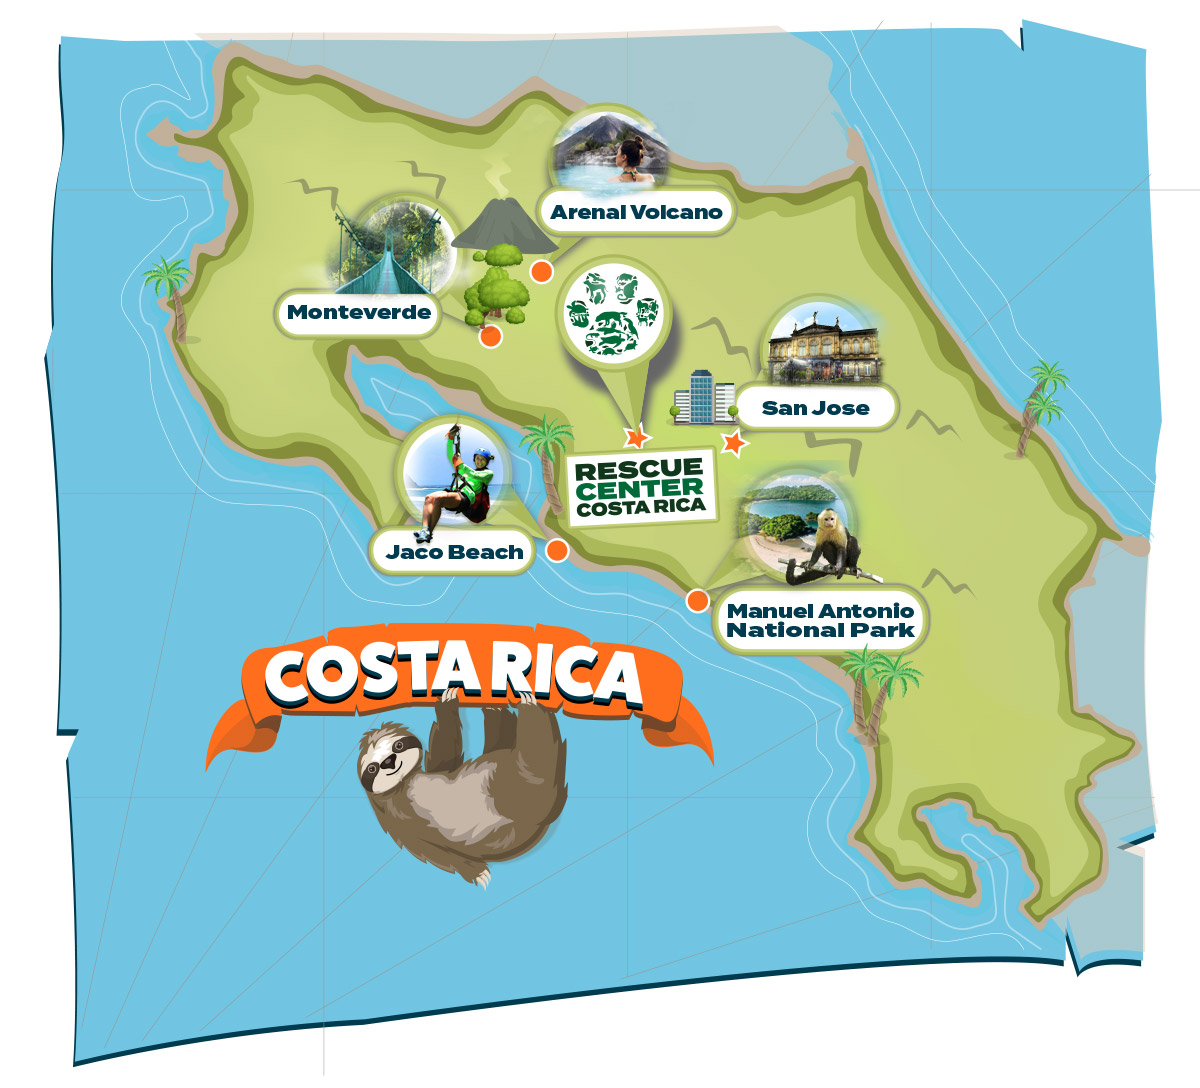 Traveling and Volunteer Abroad at Rescue Center Costa Rica